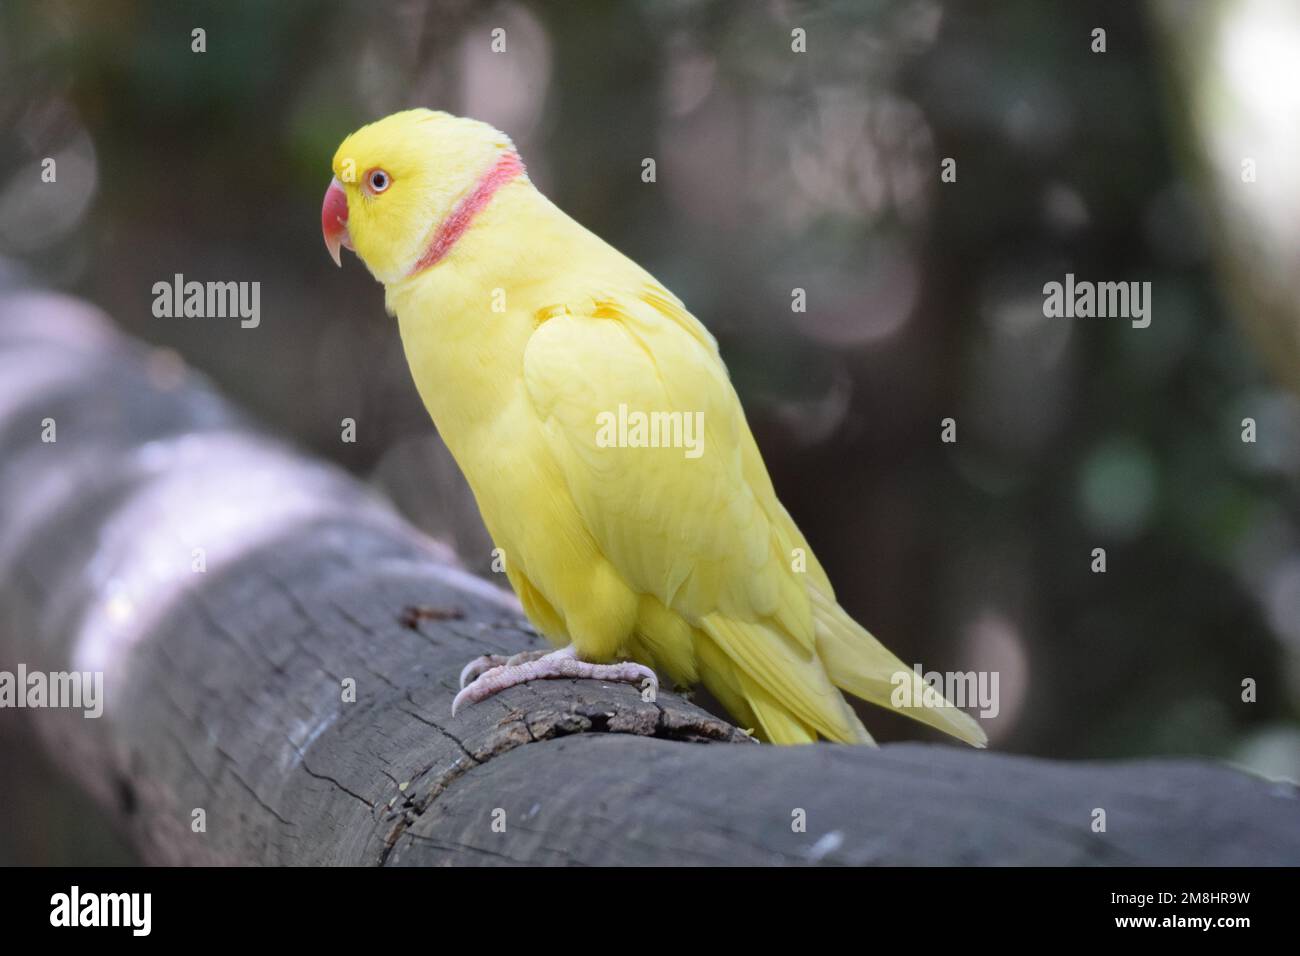 Bright yellow Indian Ringneck parakeet, a colorful variation from the often green bird which is found in Europe, Singapore and South India. Stock Photo